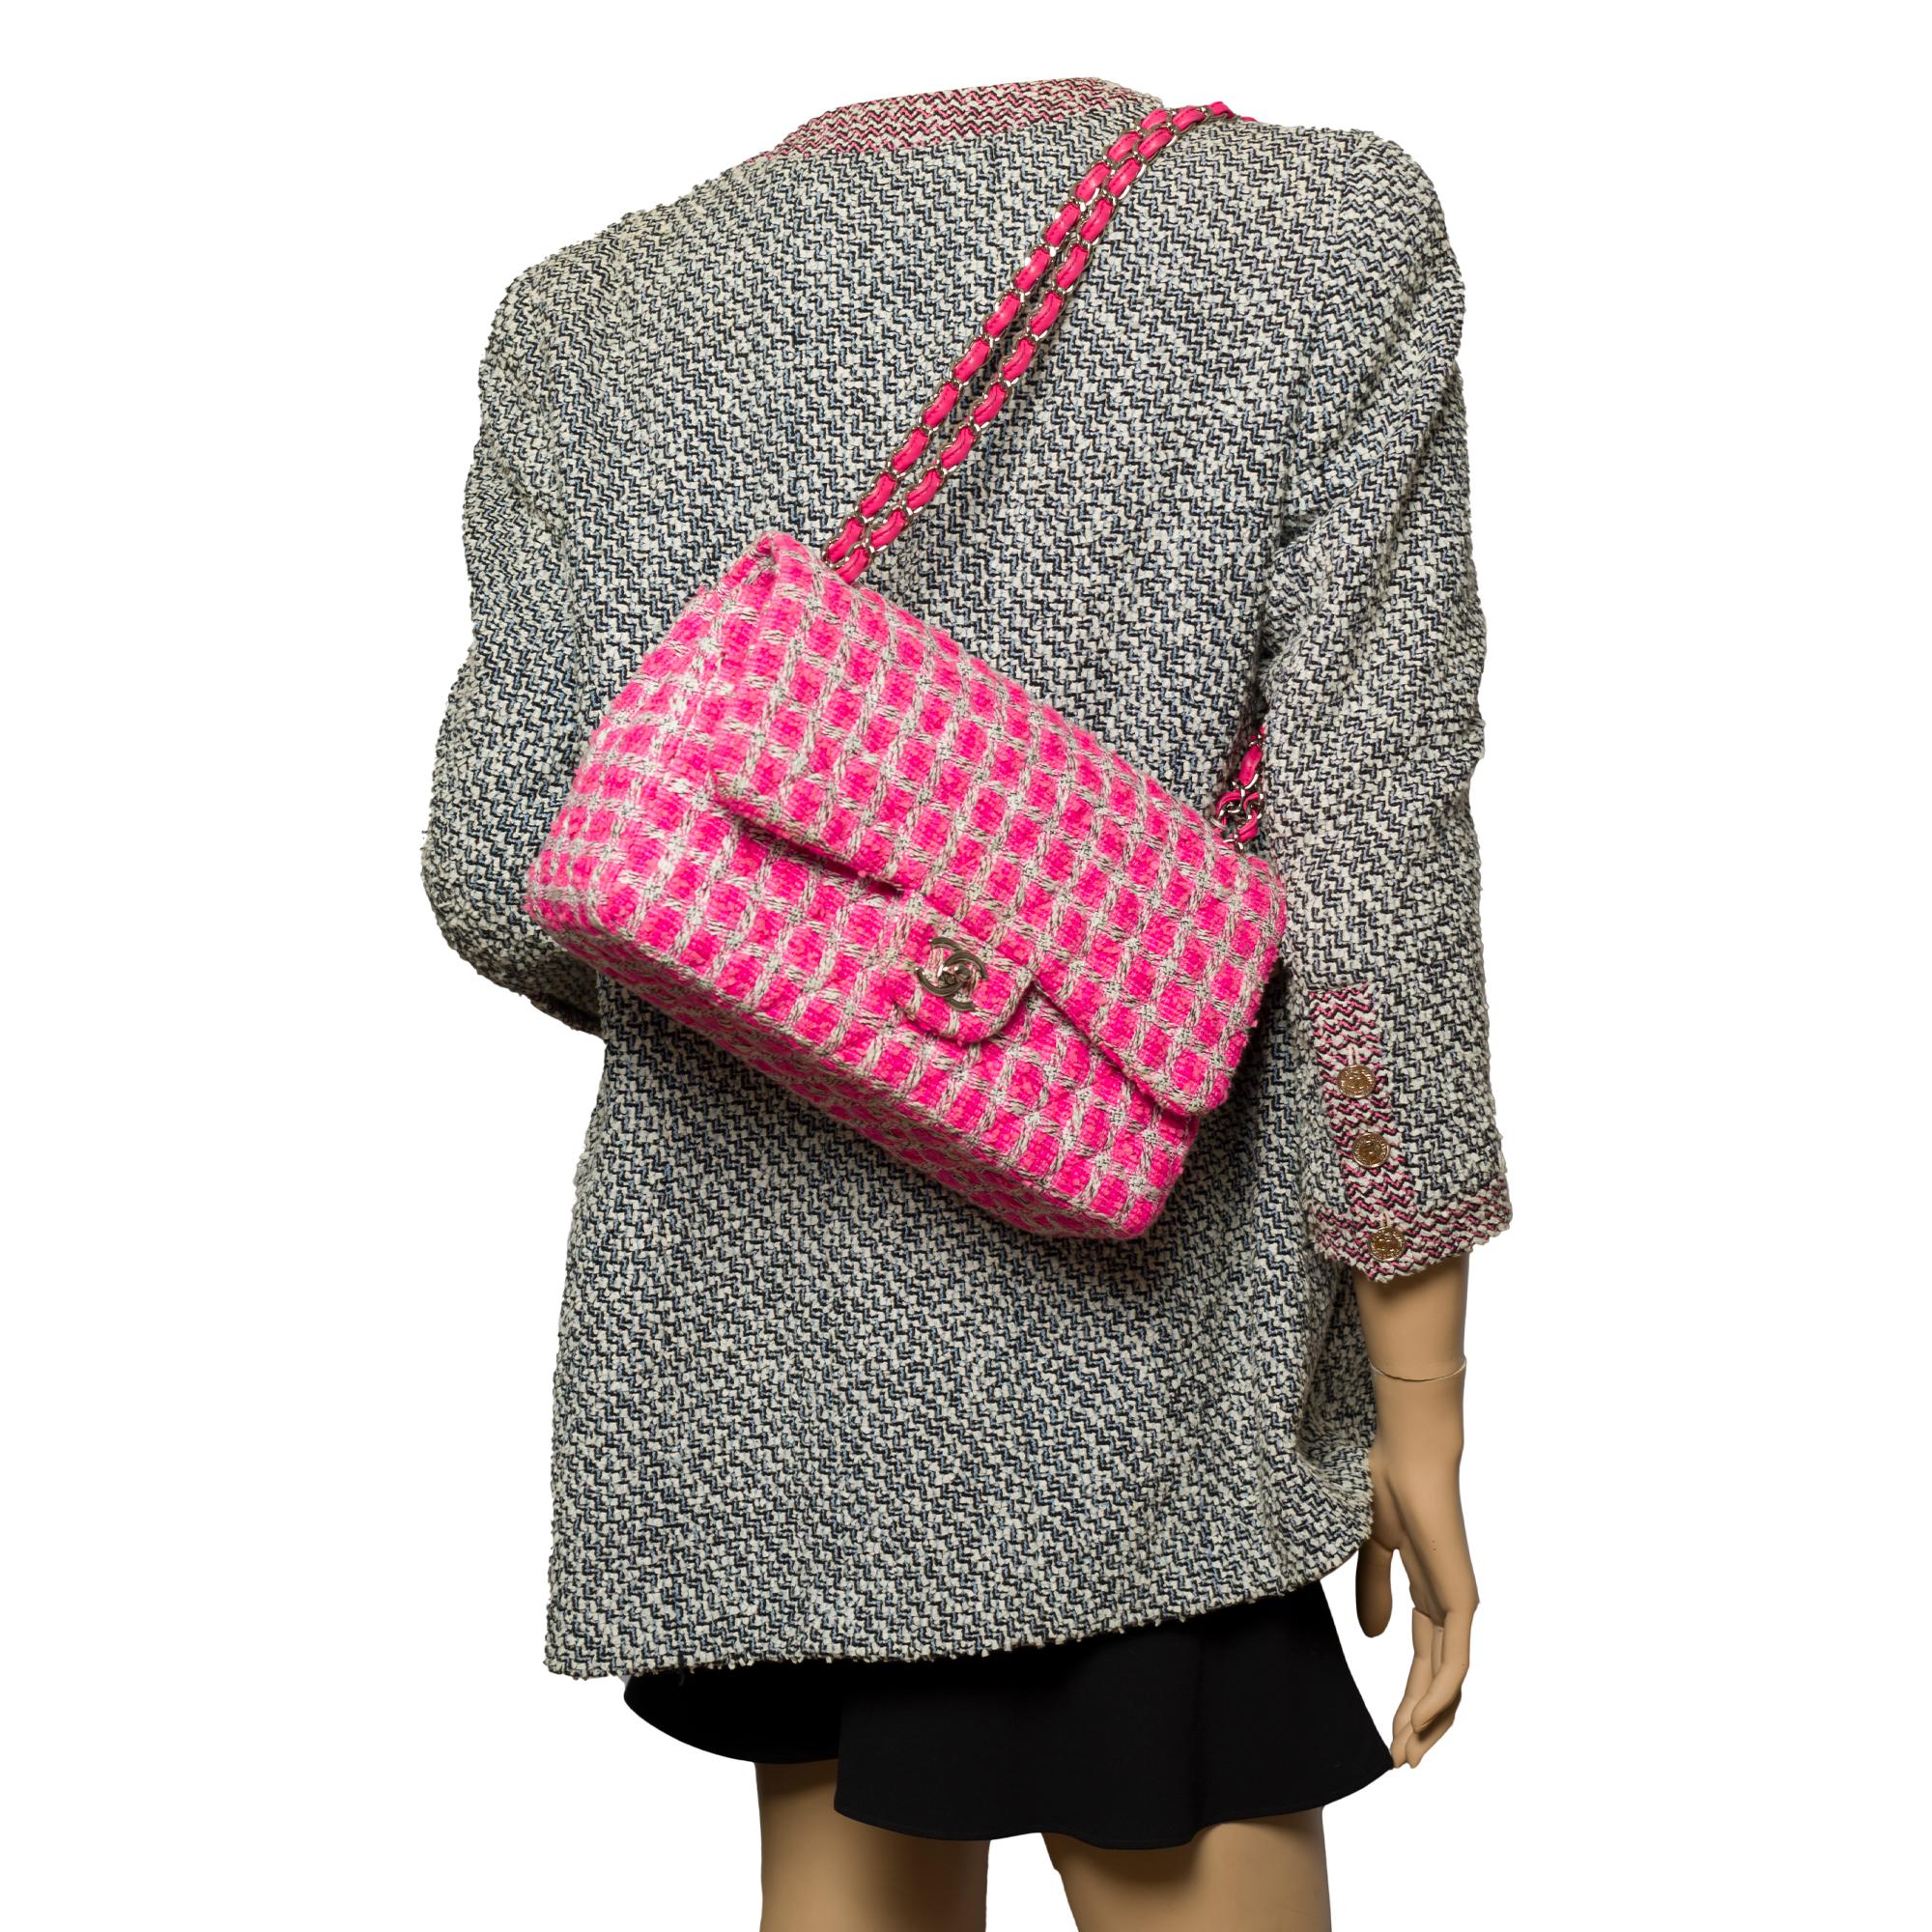 Limited Edition Chanel Timeless Jumbo Shoulder bag in Pink Tweed with SHW 6